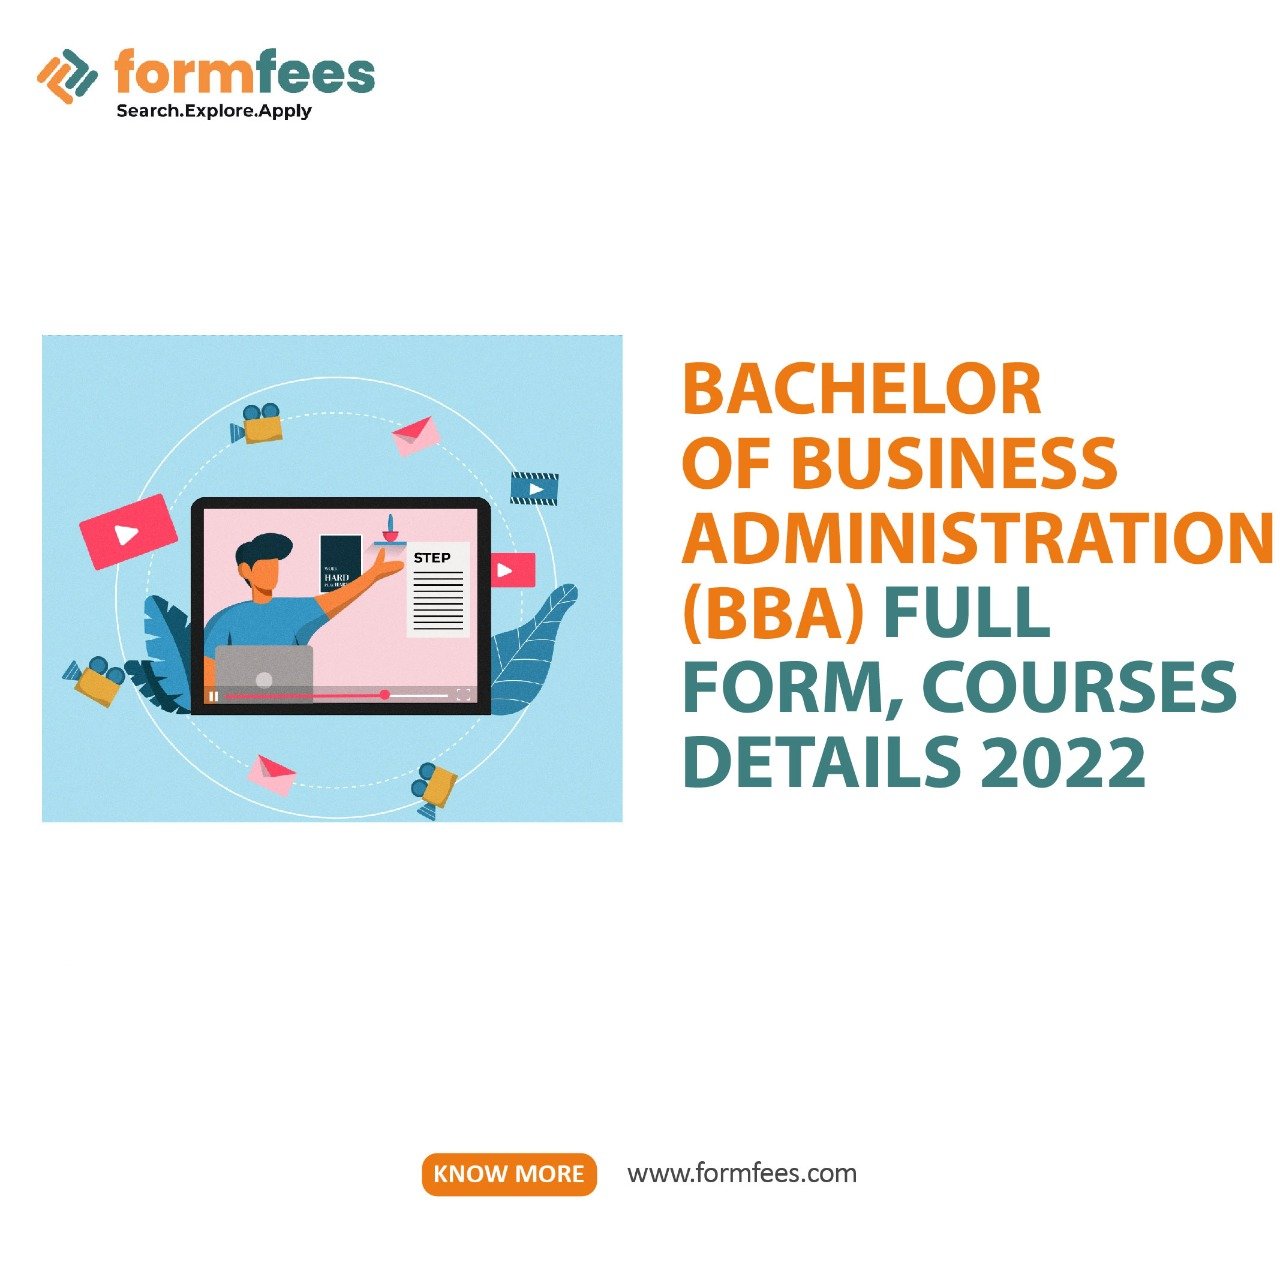 Bachelor of Business Administration (BBA) Full Form, Courses Details 2022